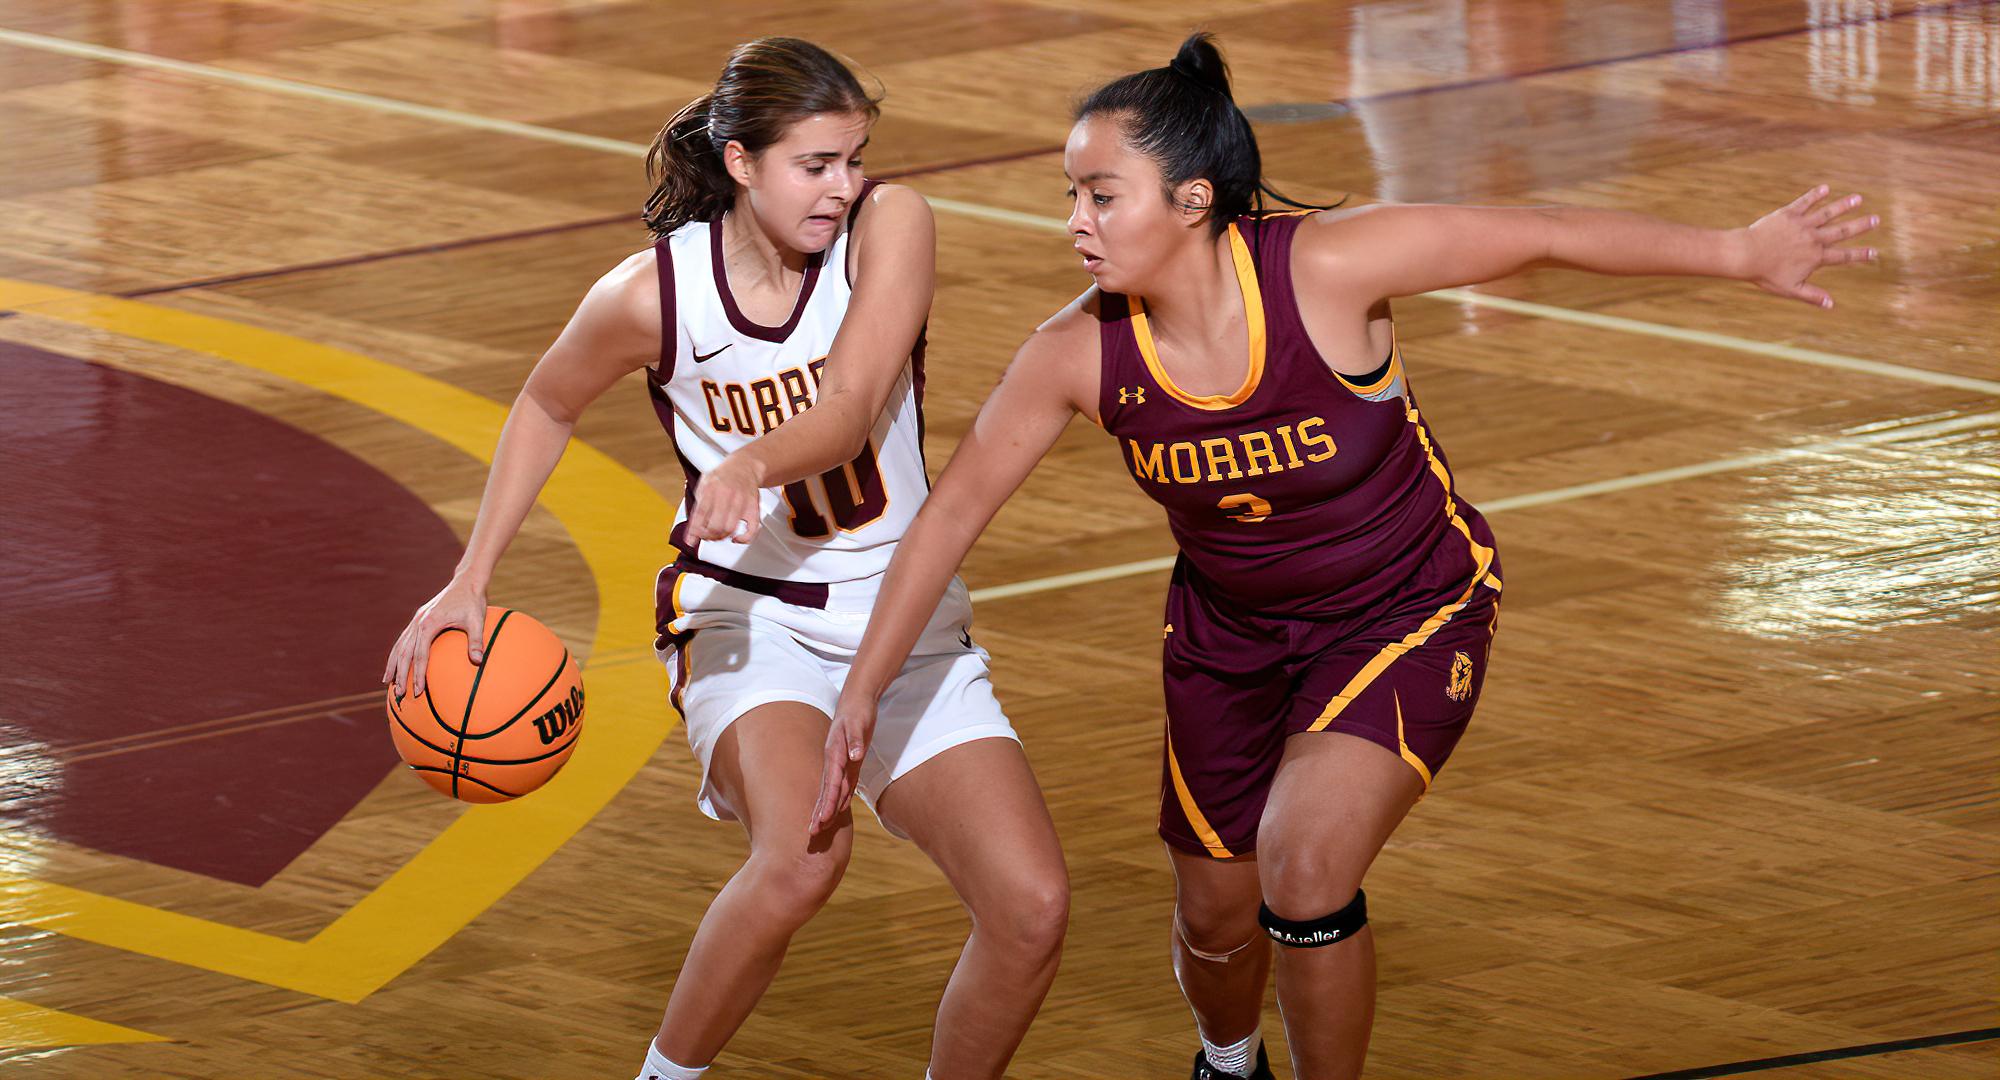 Sophomore Carlee Sieben shields the ball from a Morris defender in the Cobbers' 85-60 win. Sieben finished with a game-high 27 points.